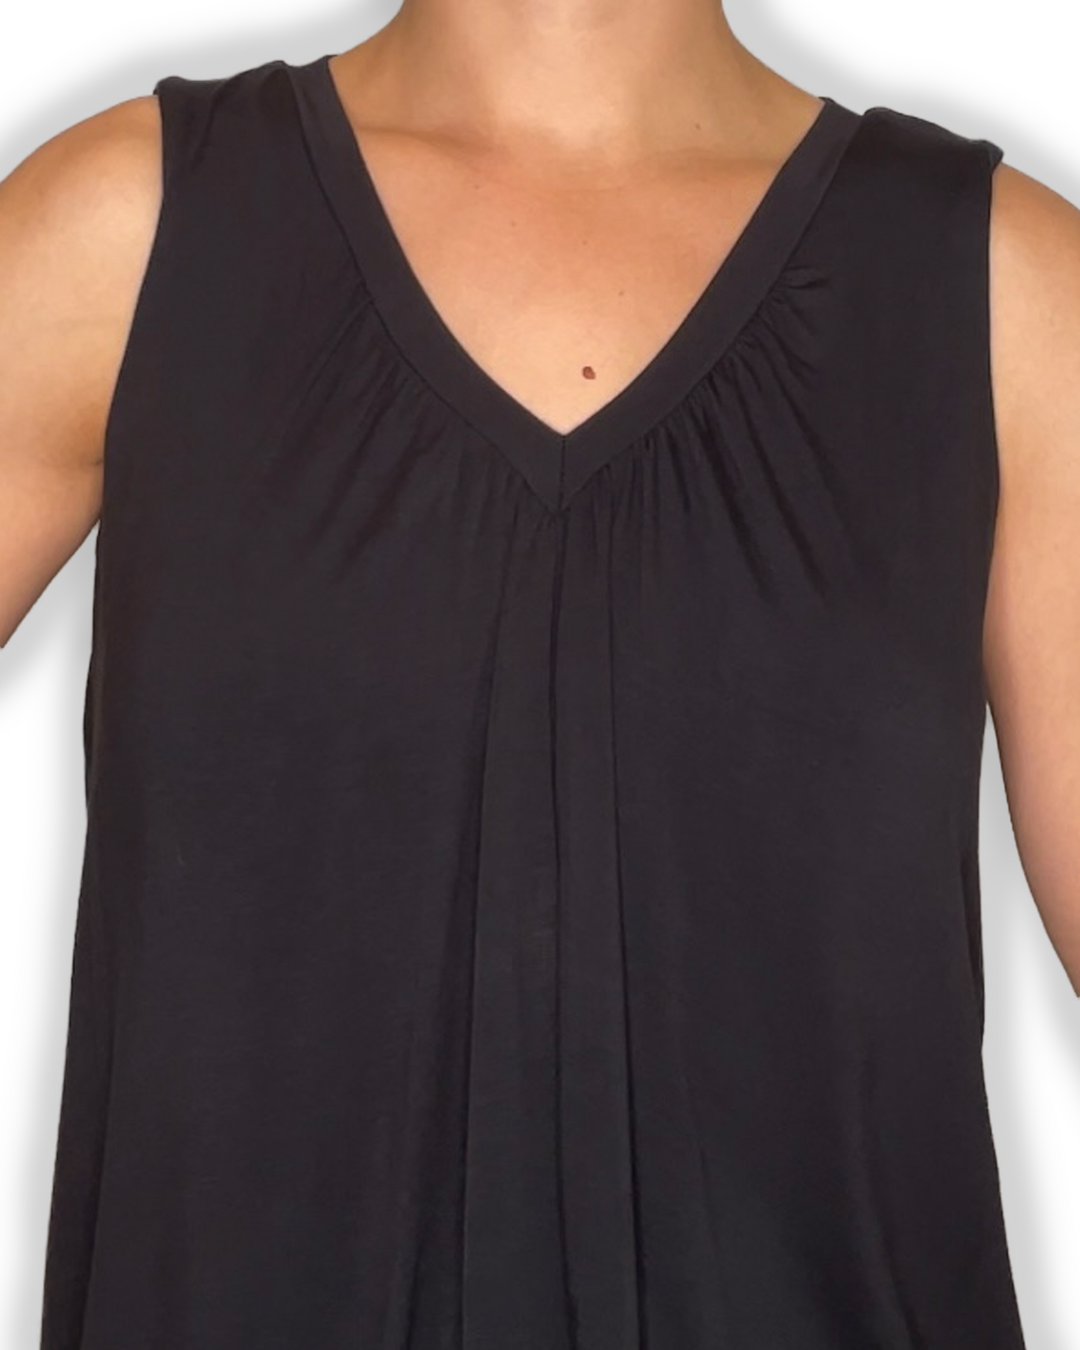 Jia+Kate braless bamboo top in black color Ashley style front